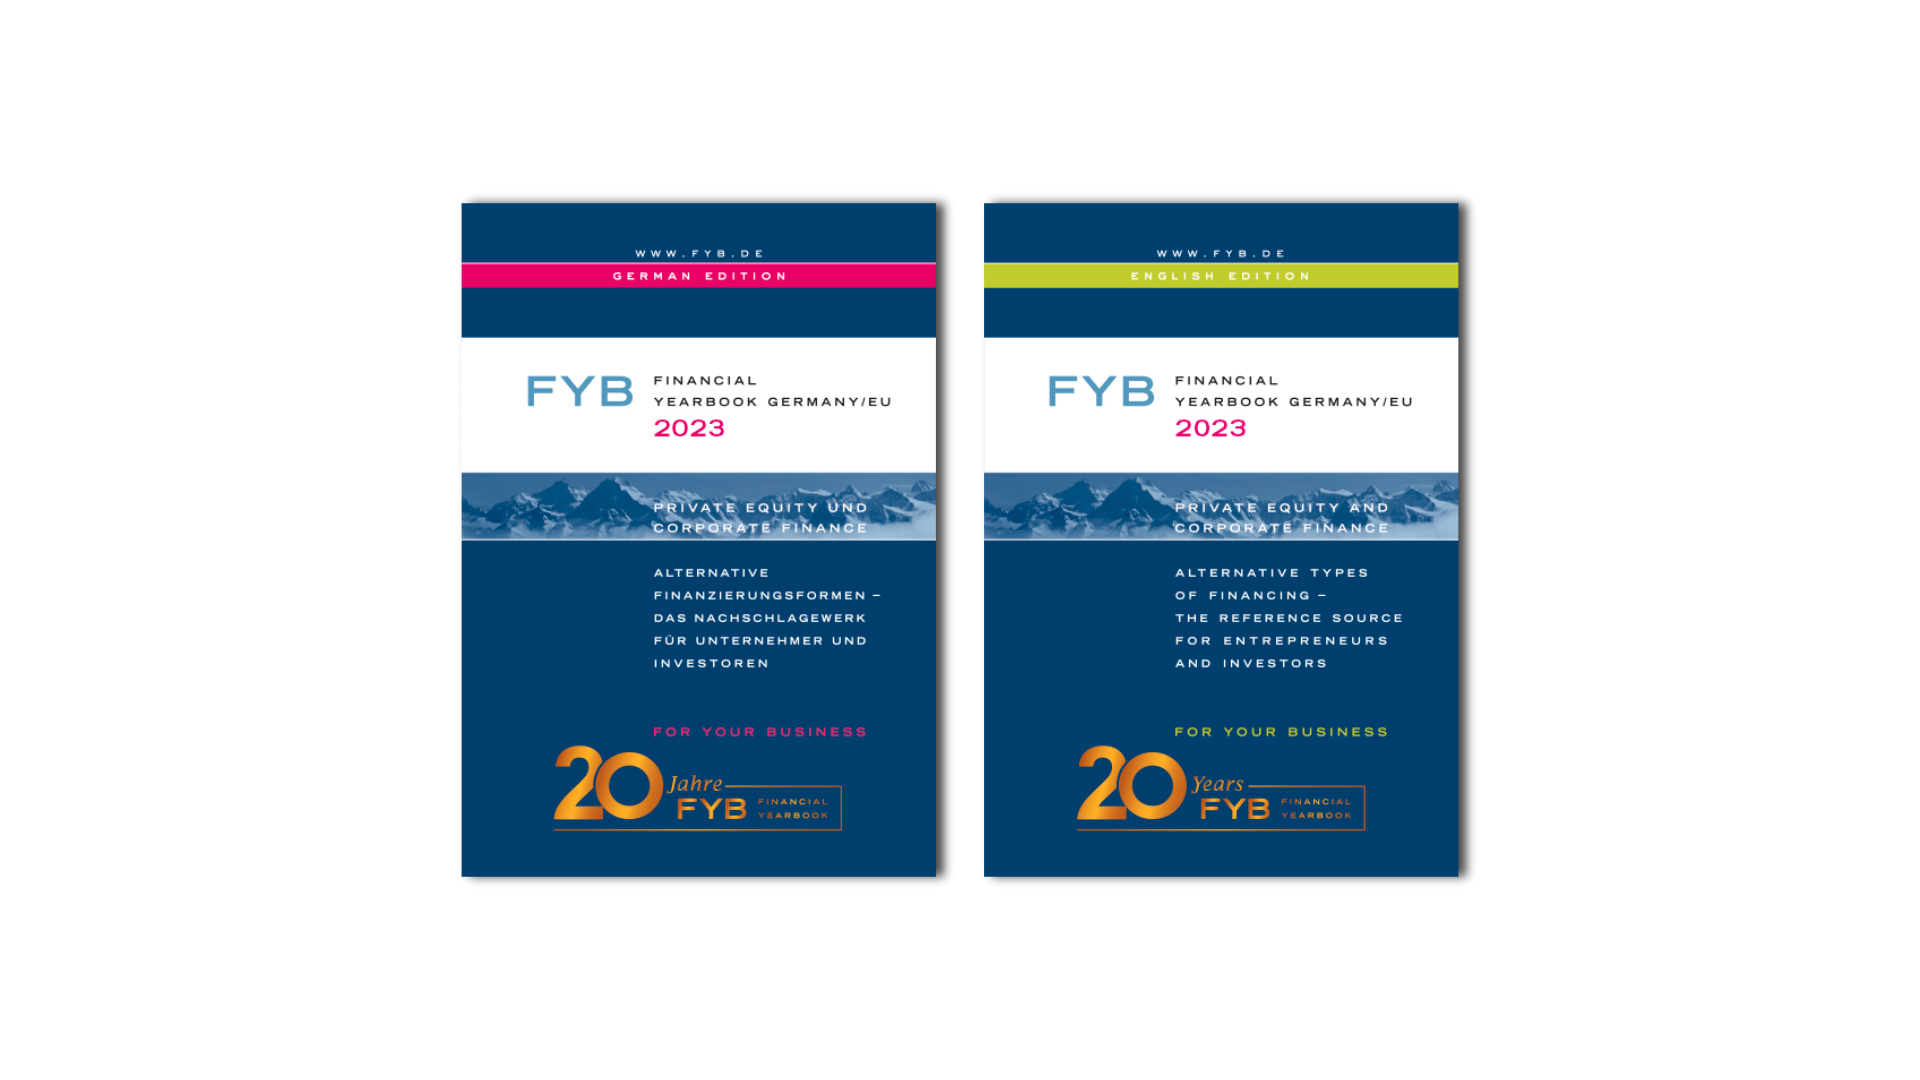 FYB-2023-book-cover-images